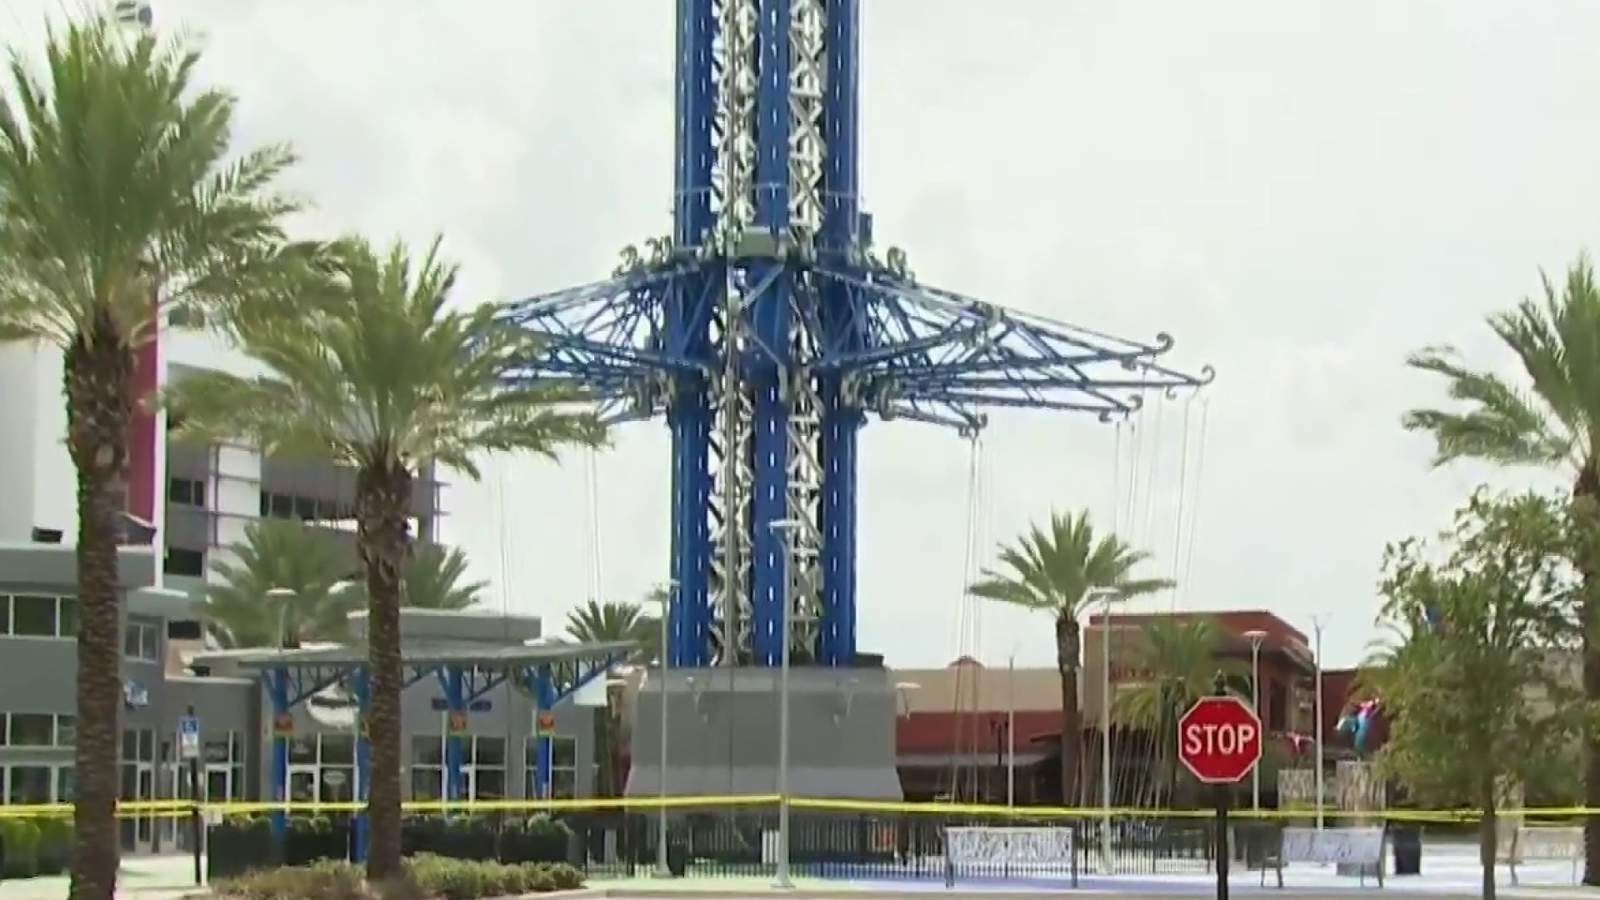 21-year-old worker falls to death from 450-foot swing ride in Orlando